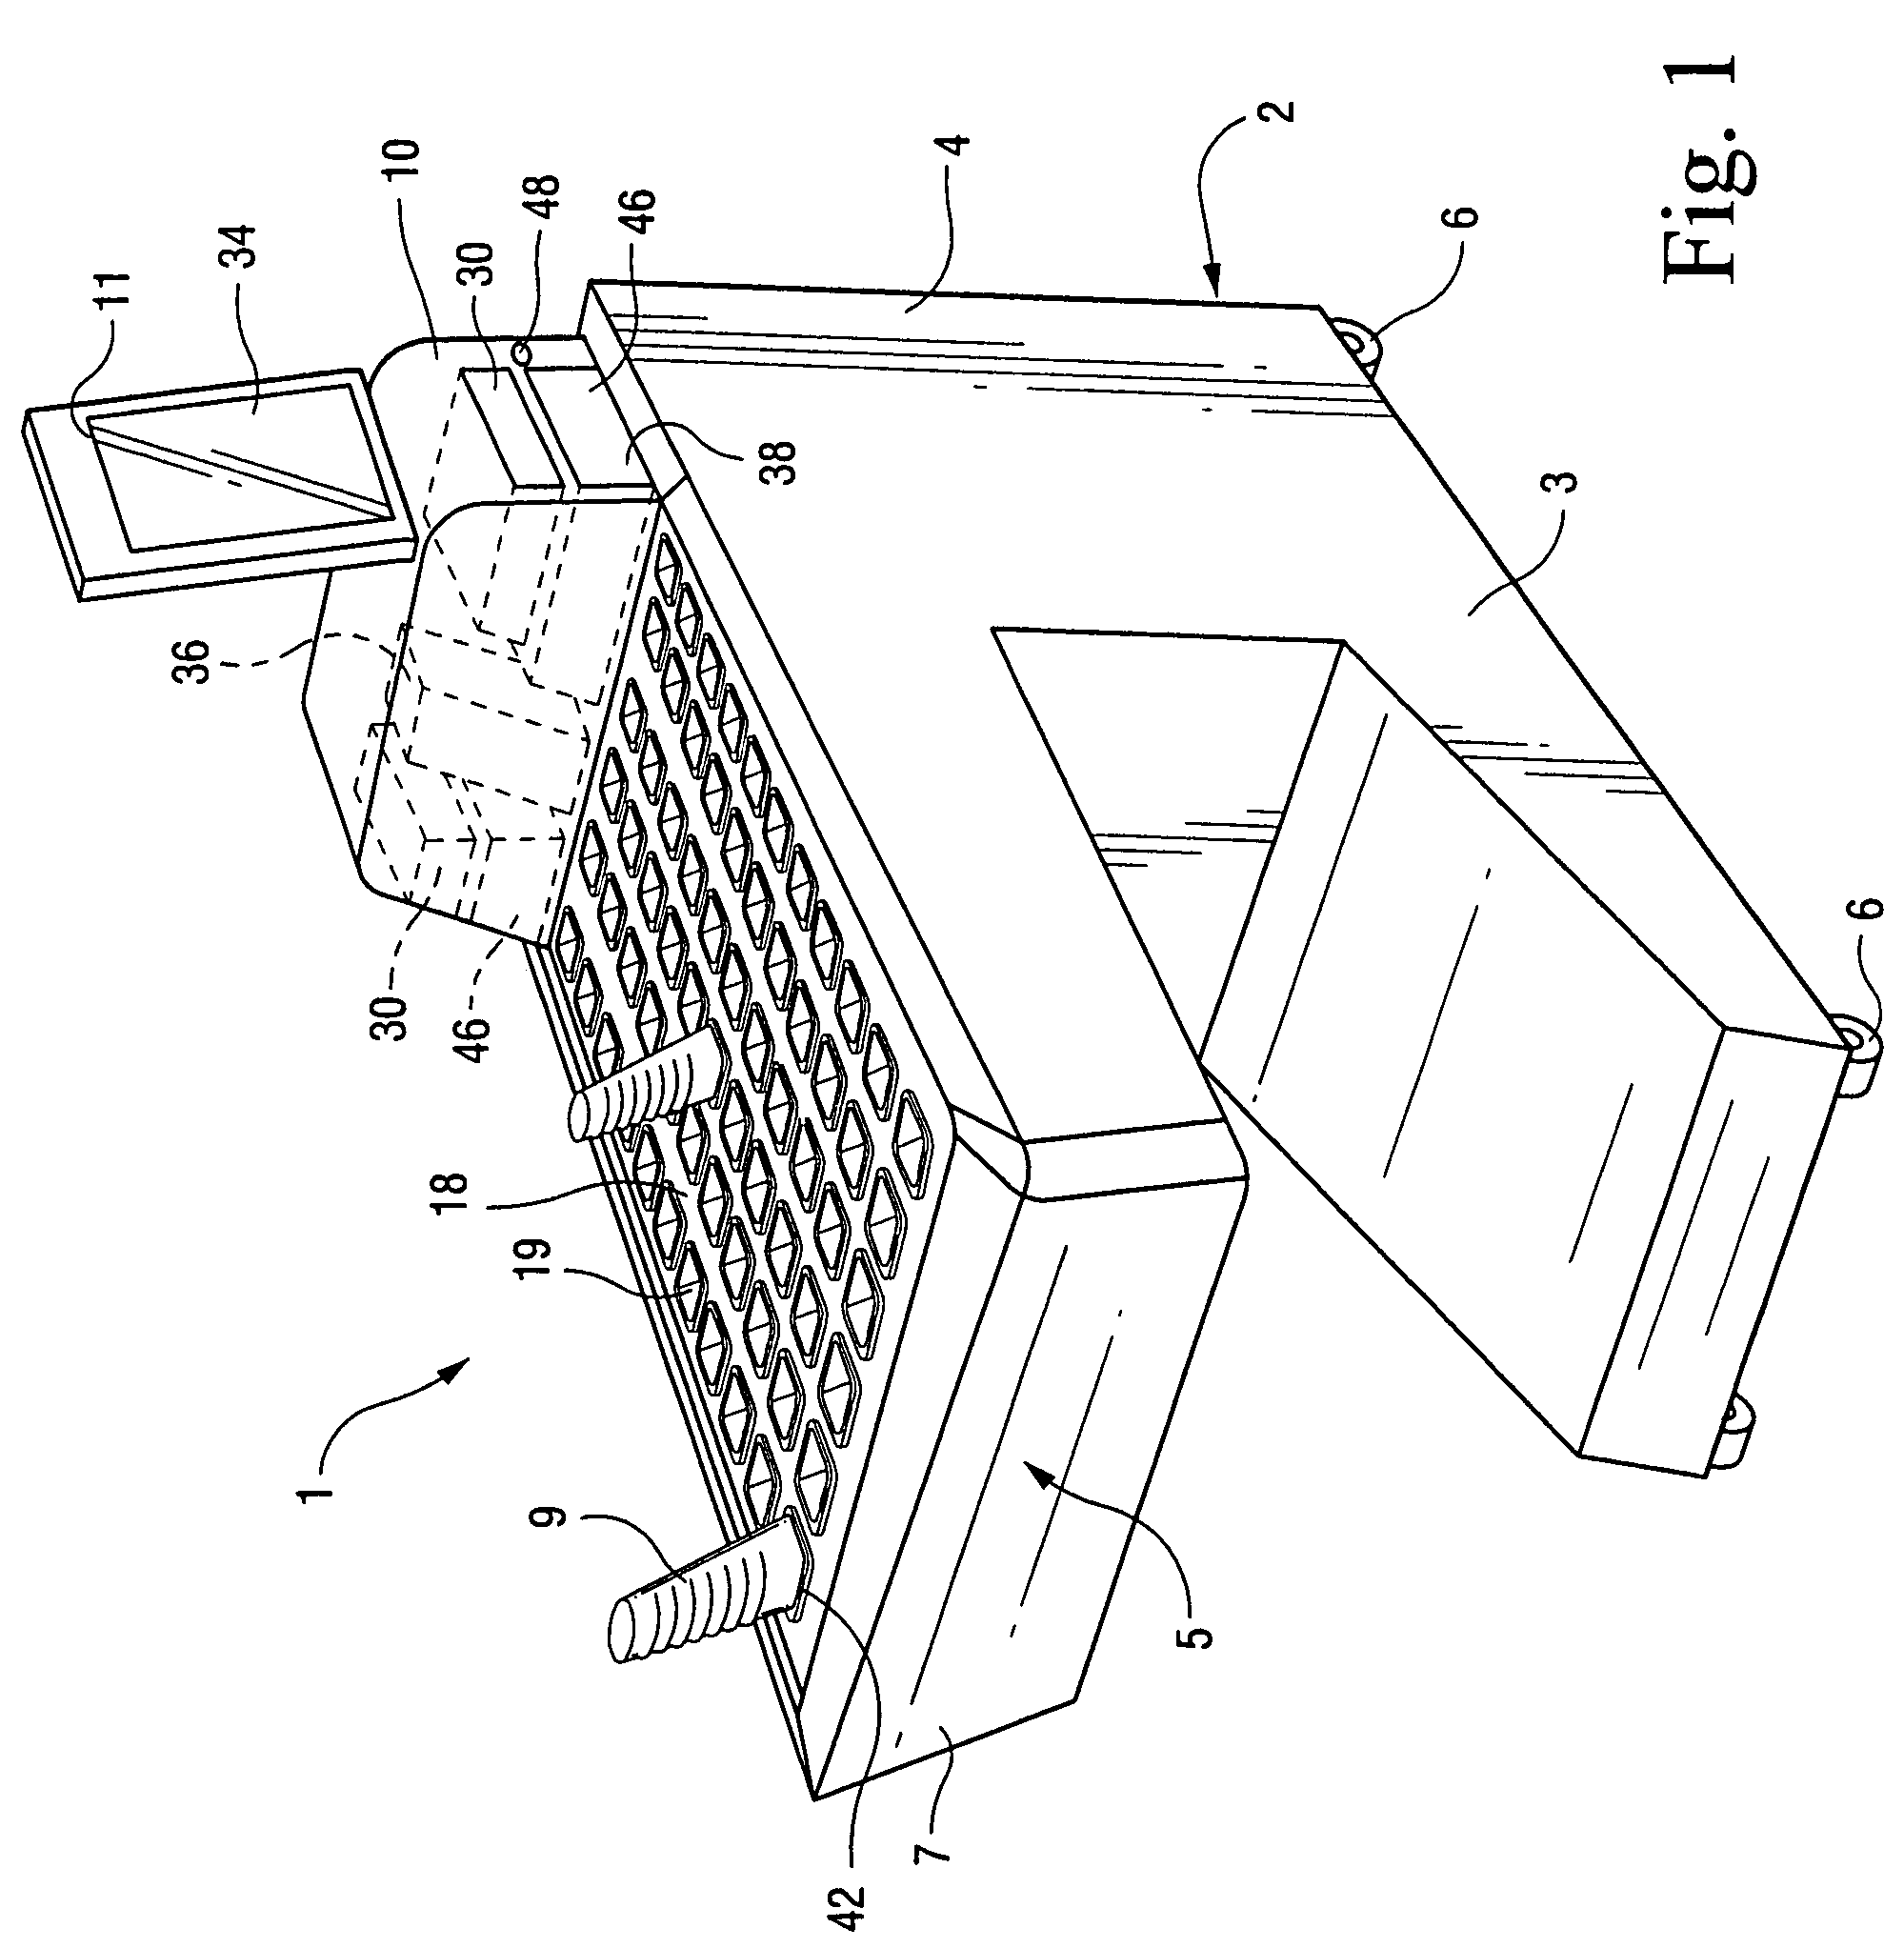 Dispensing device of portable terminals for acquiring product data in a shopping centre, integrated system for dispensing said portable terminals, and integrated system for selling products through the use of portable terminals